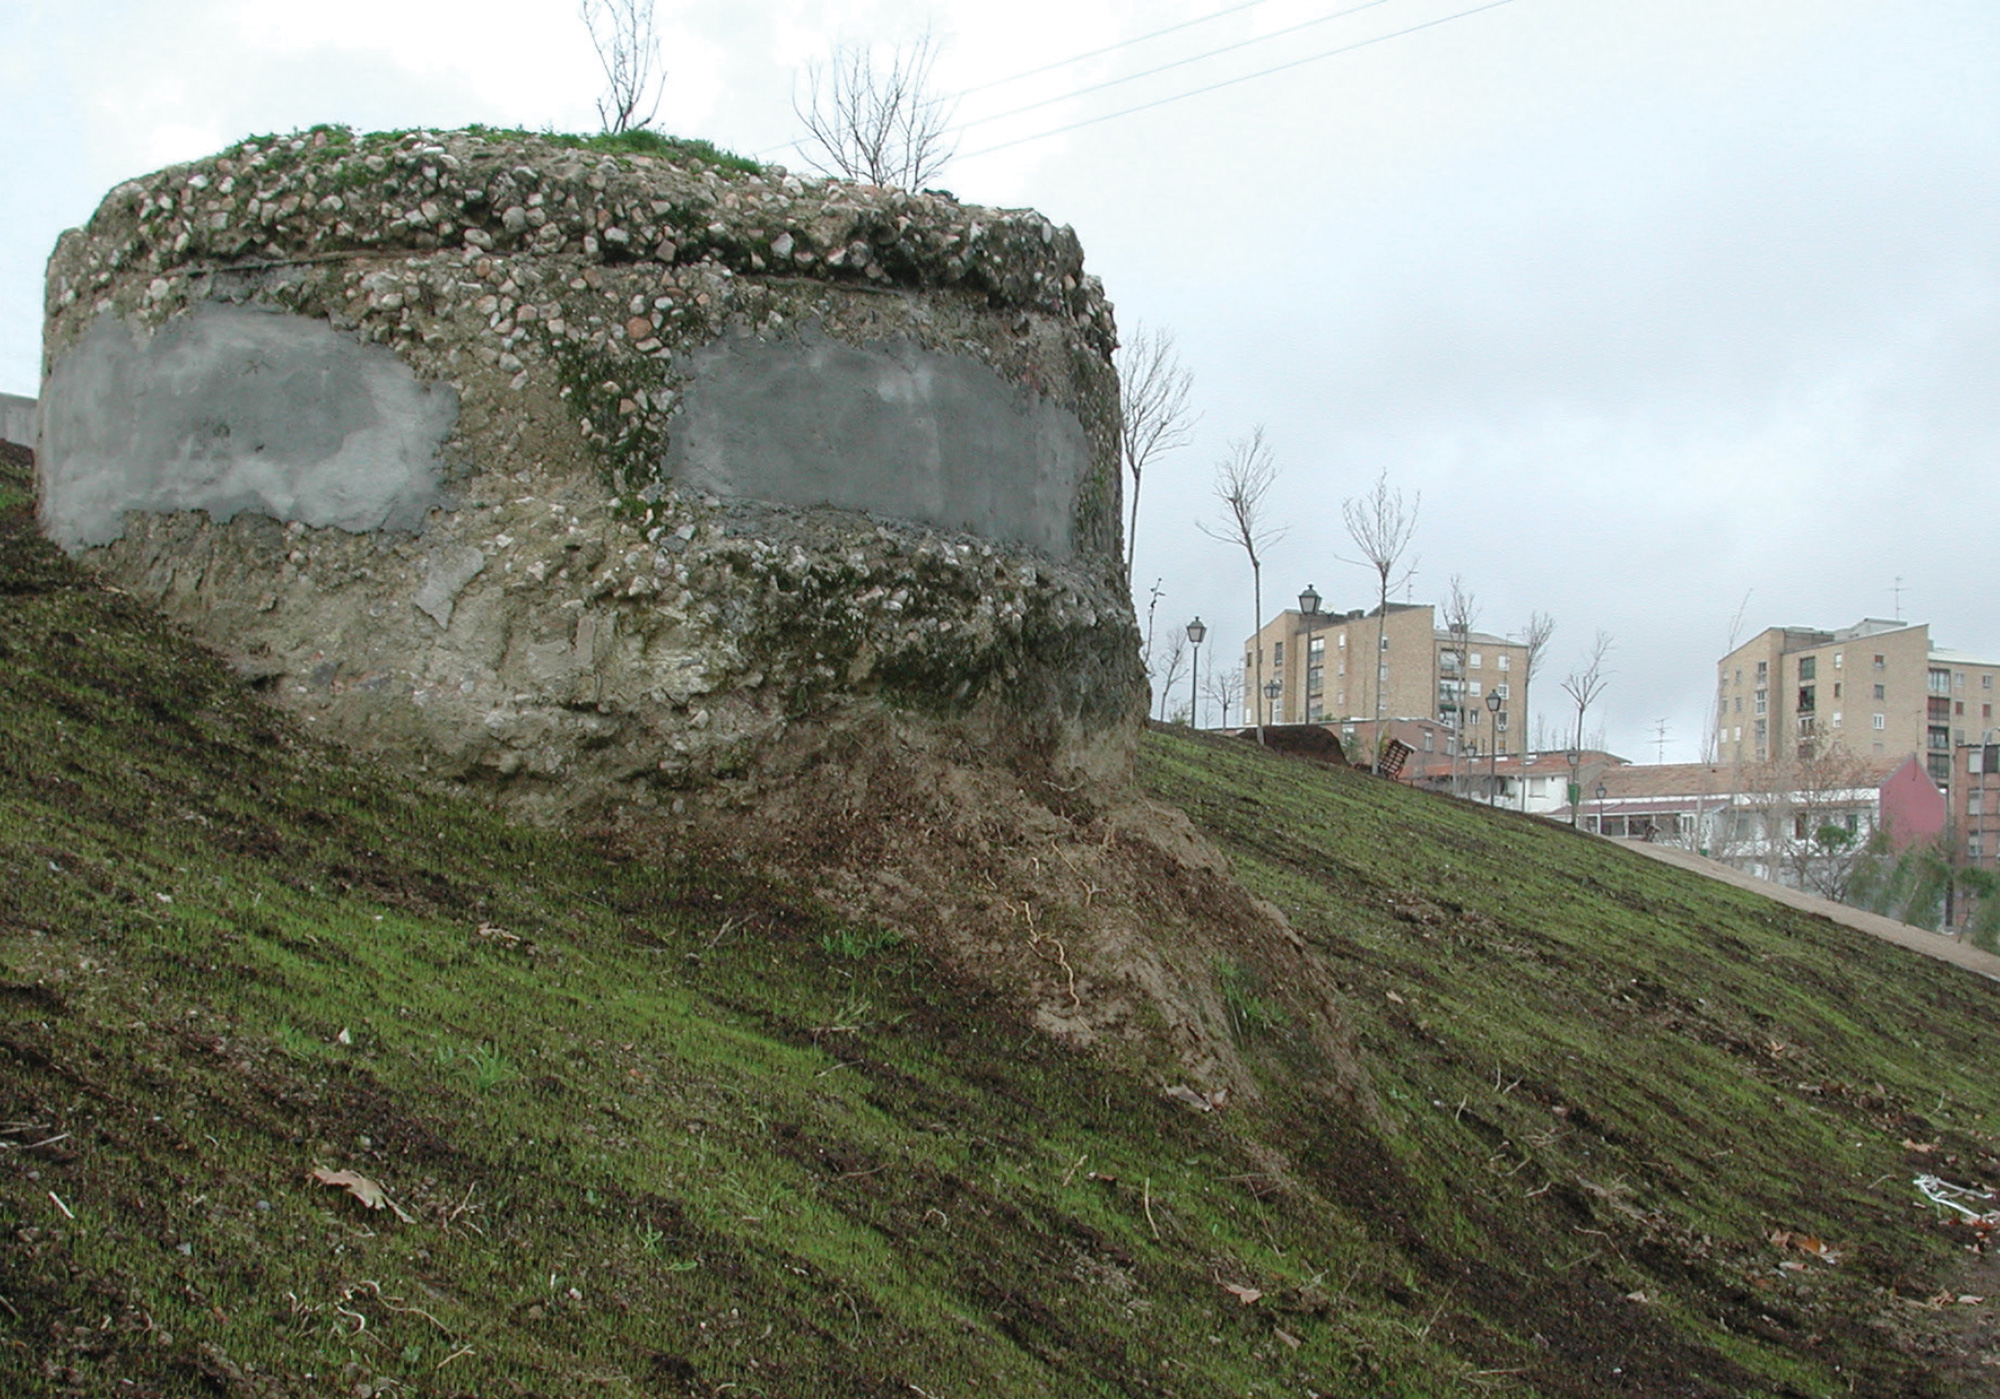 A photograph of an overgrown cement monument base, sitting on a hill.